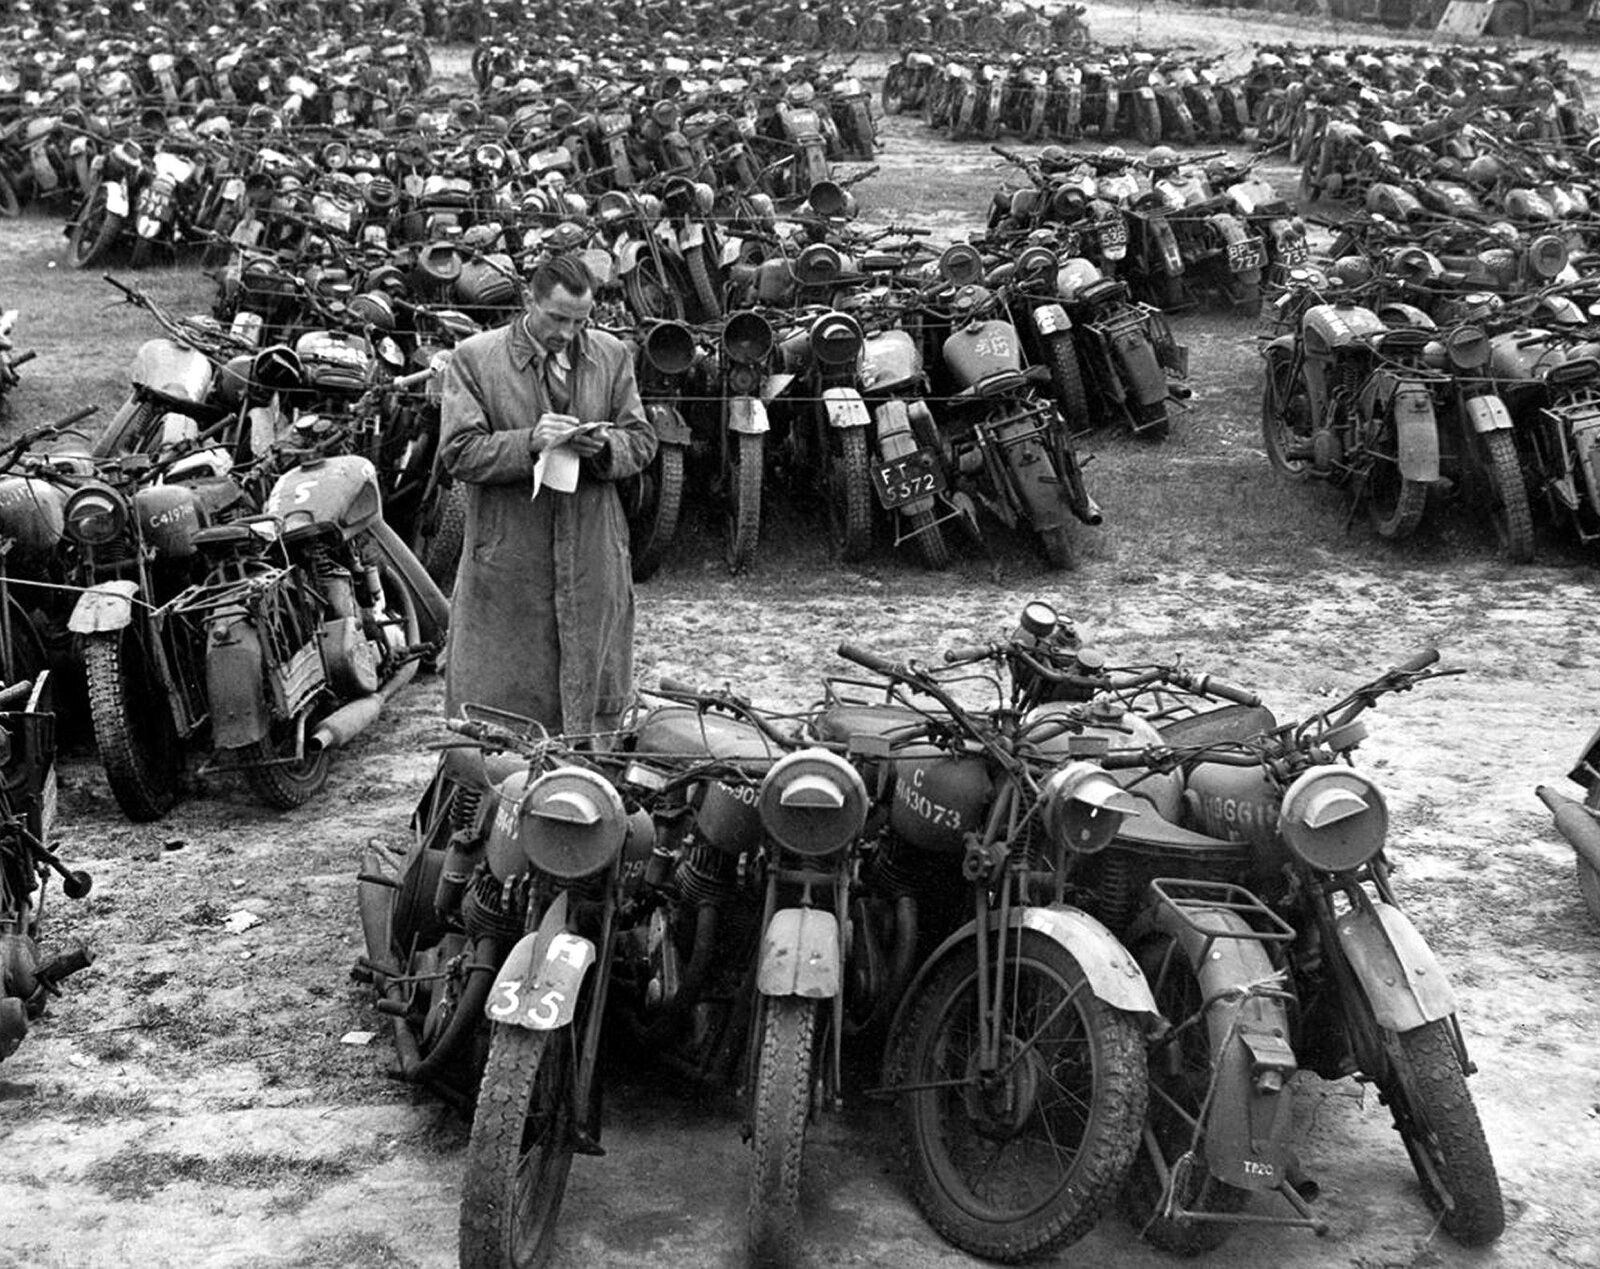 1946 WW2 MILITARY MOTORCYCLES UP FOR AUCTION in Packs of 5 PHOTO  (184-W)